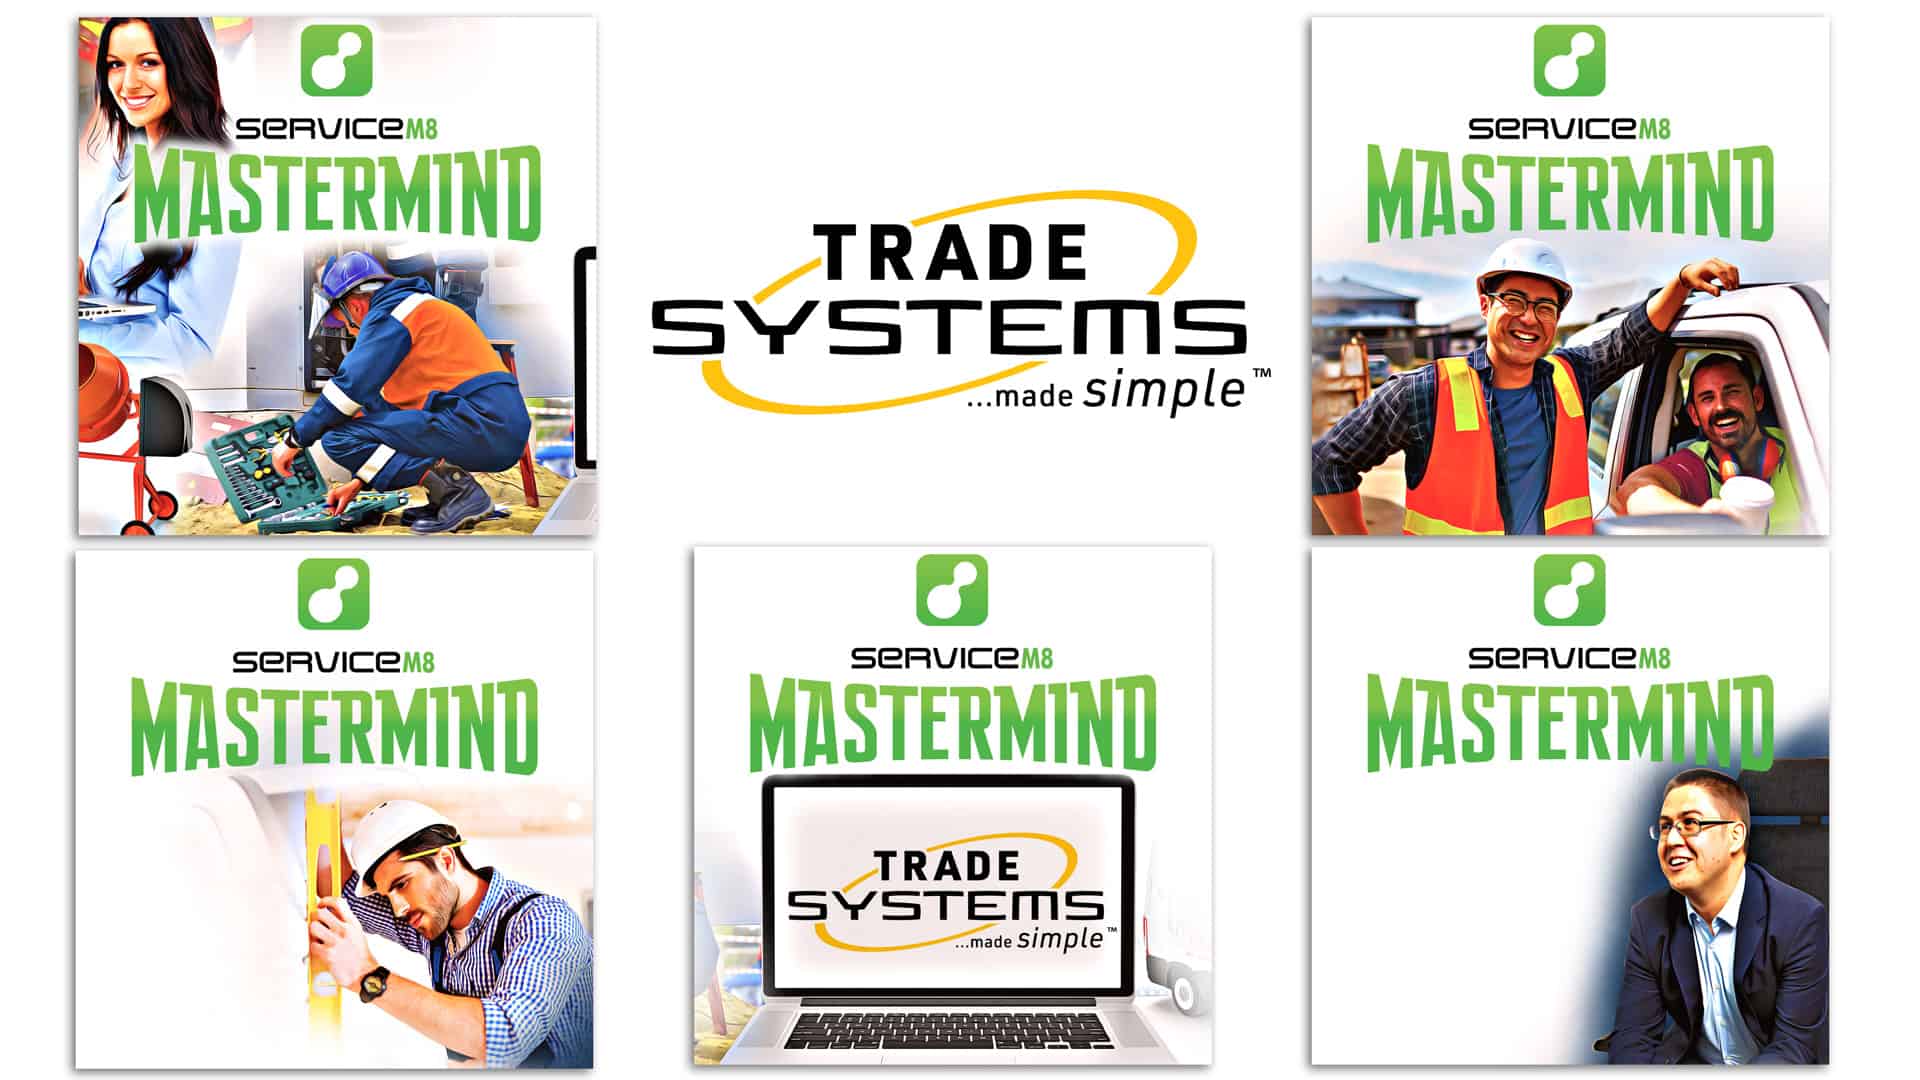 Trade Systems Made Simple Composite image